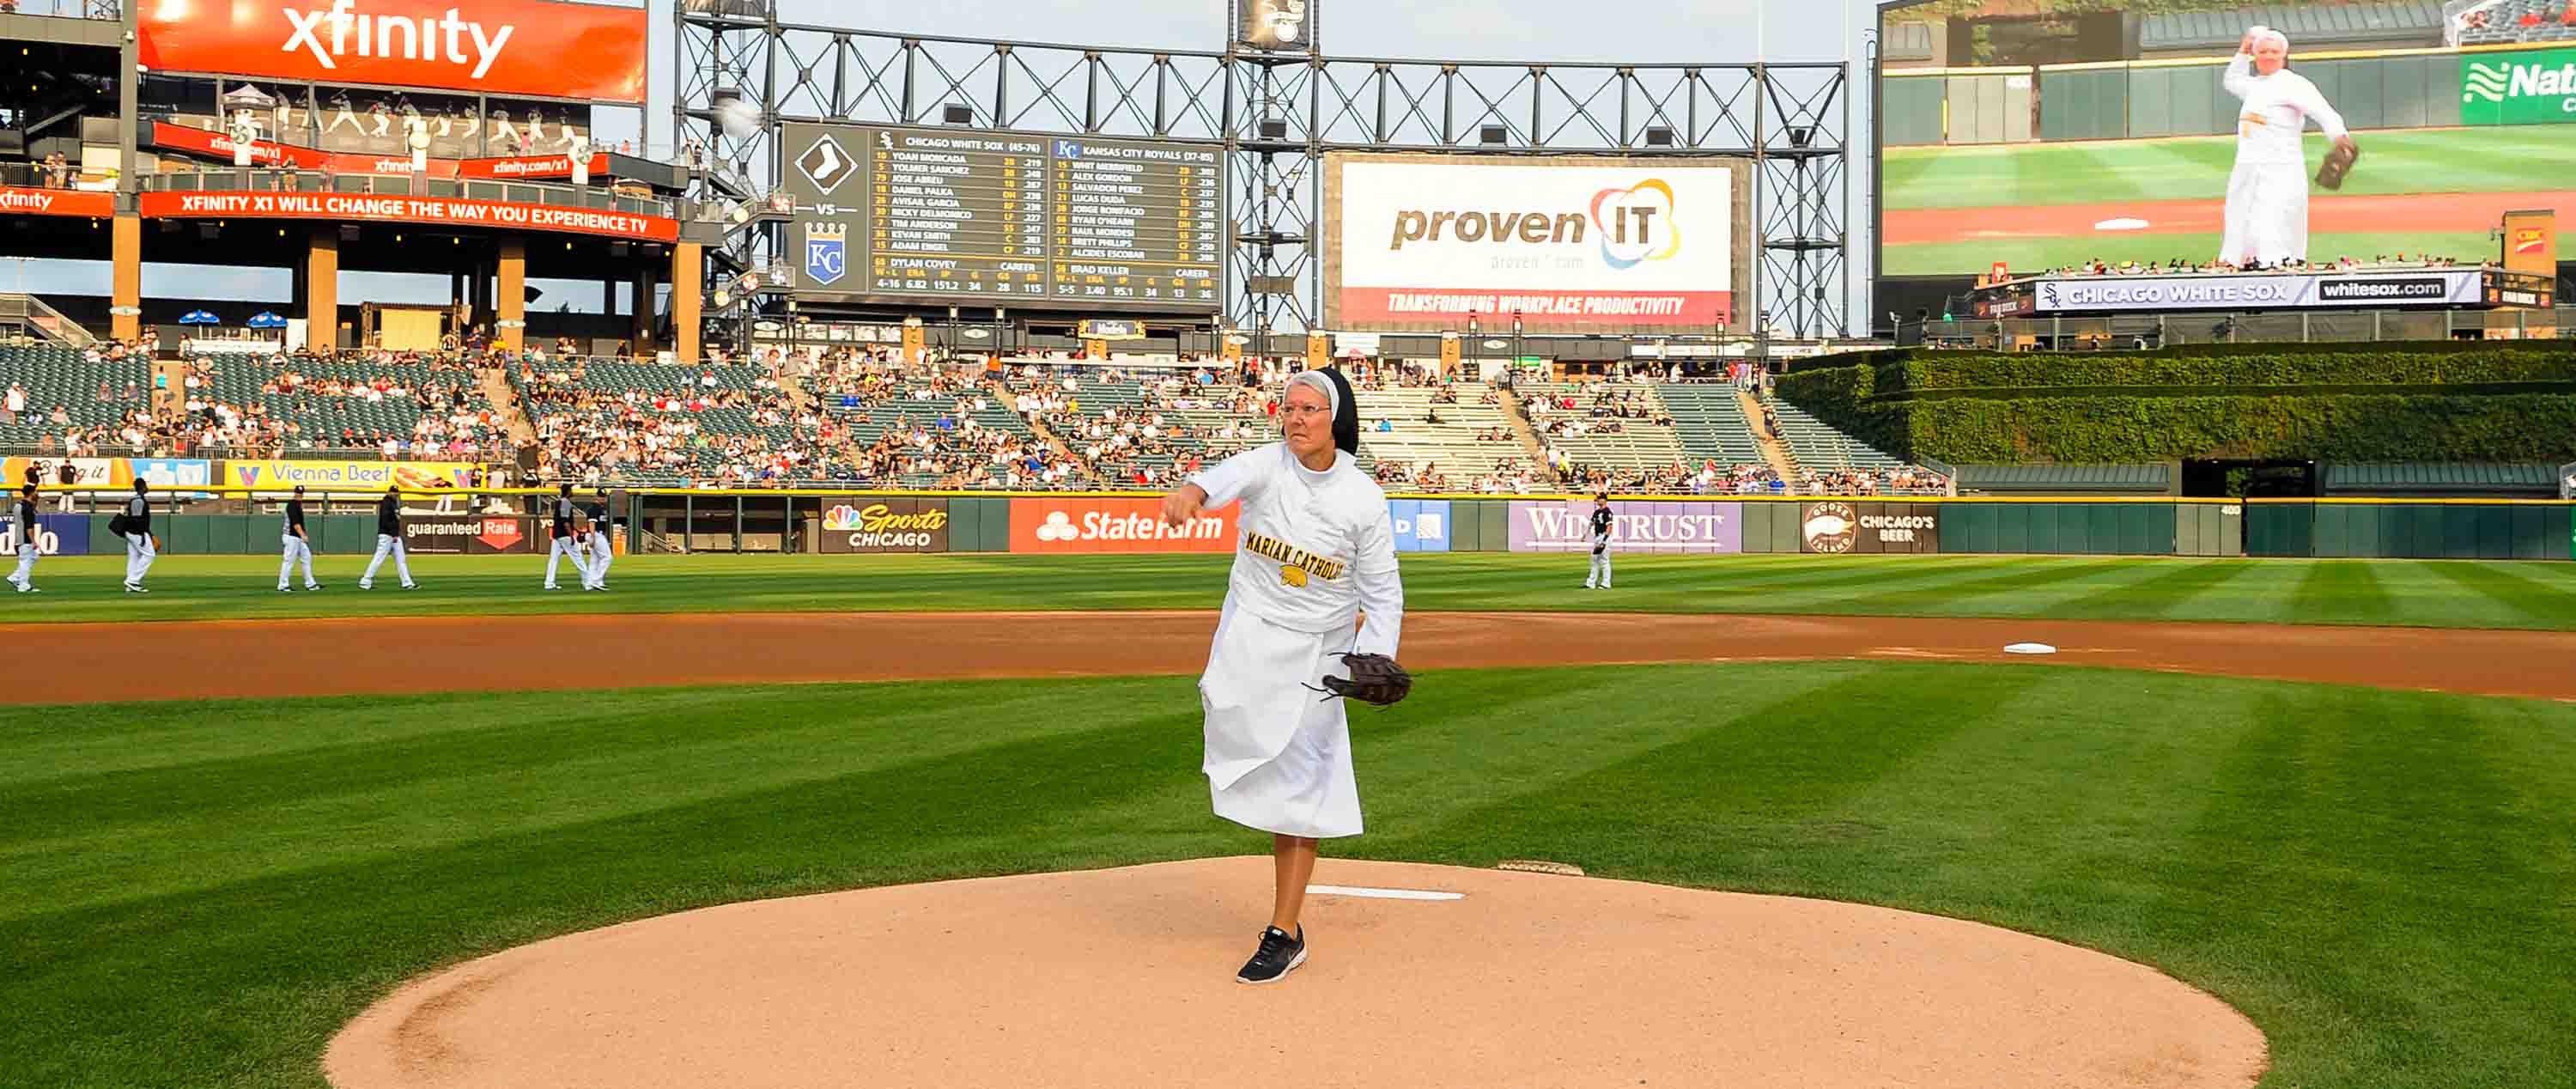 Dominican sisters pregame first pitch wows crowd, online world